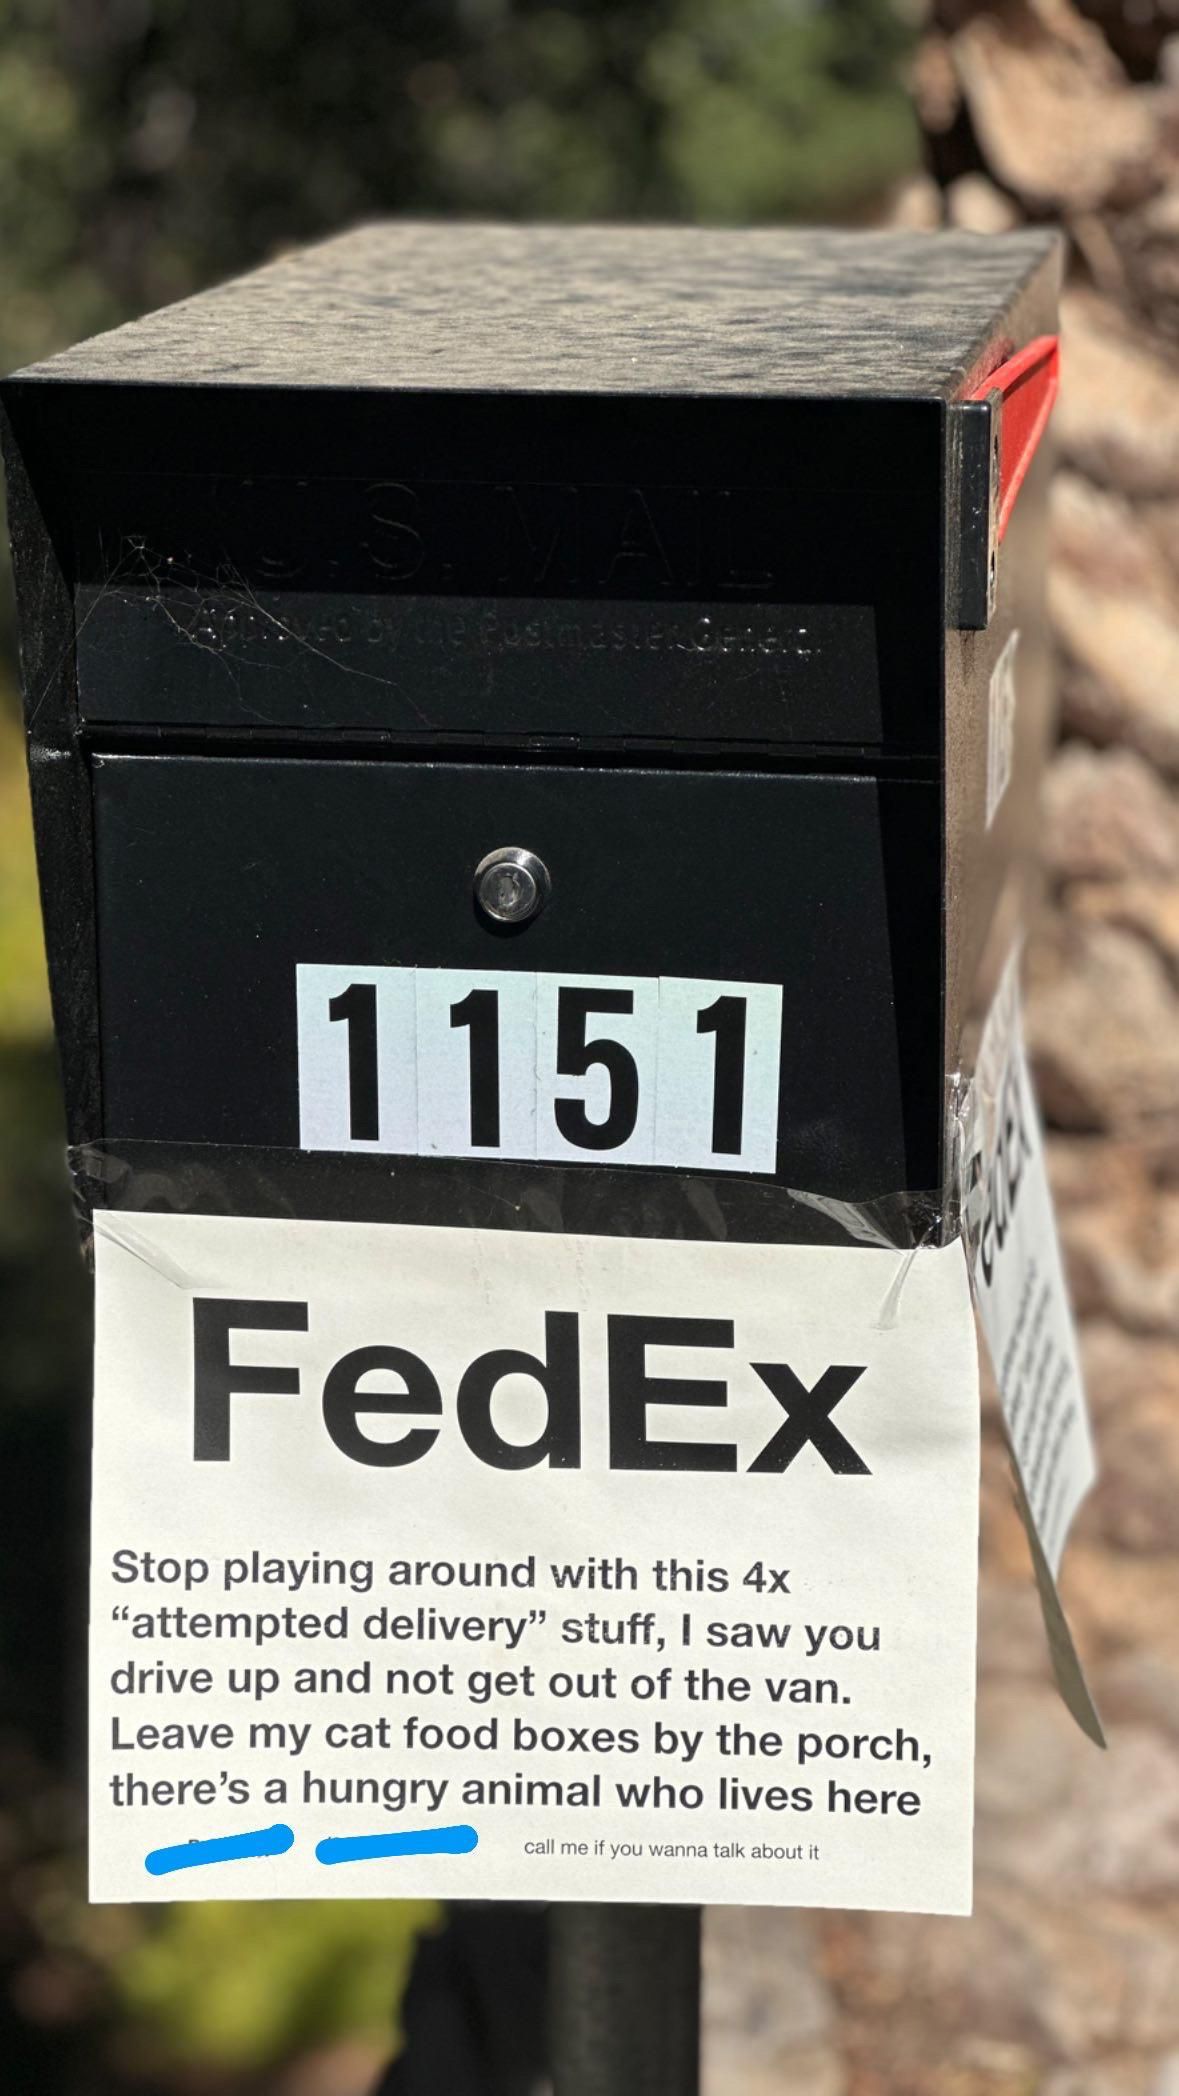 “Stop playing games FedEx”